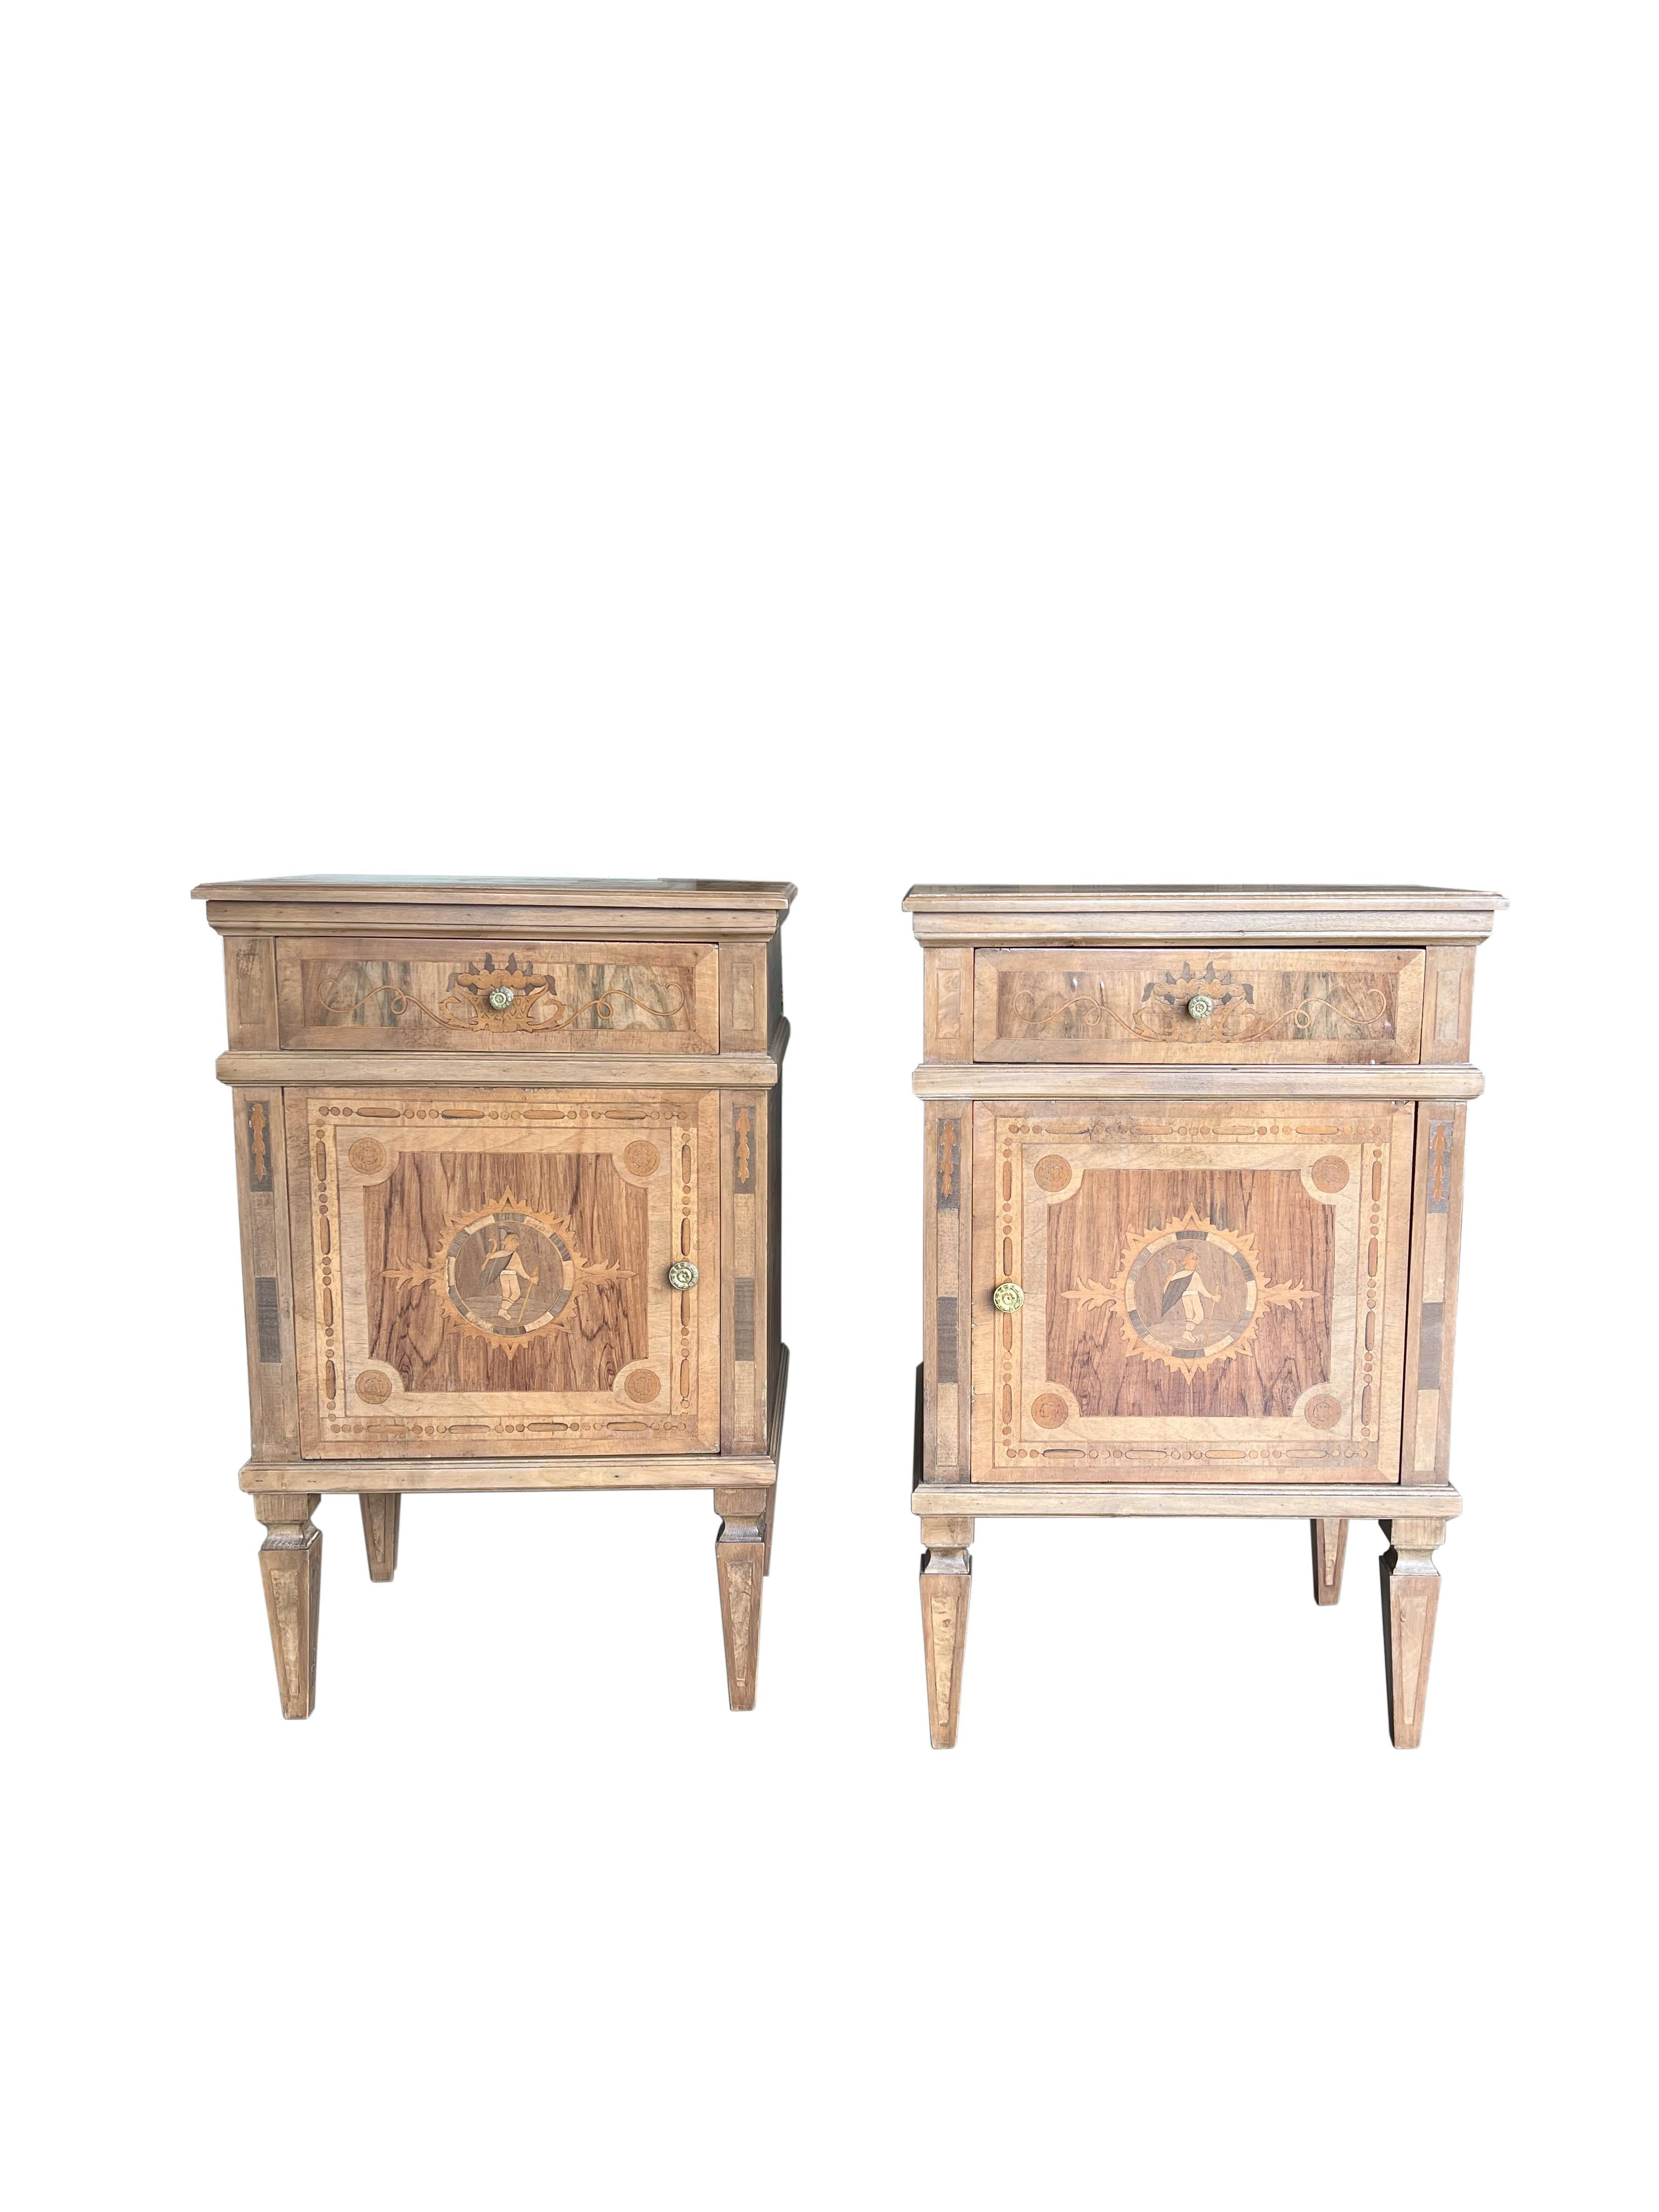 Handsome Louis XVI Style Italian walnut pair of nightstands with burl inlay marquetry, Tuscany circa 1920. Single upper drawer with dovetail joinery above the door, with brass pulls. Fine arts & crafts detail exhibited in a trim, modern